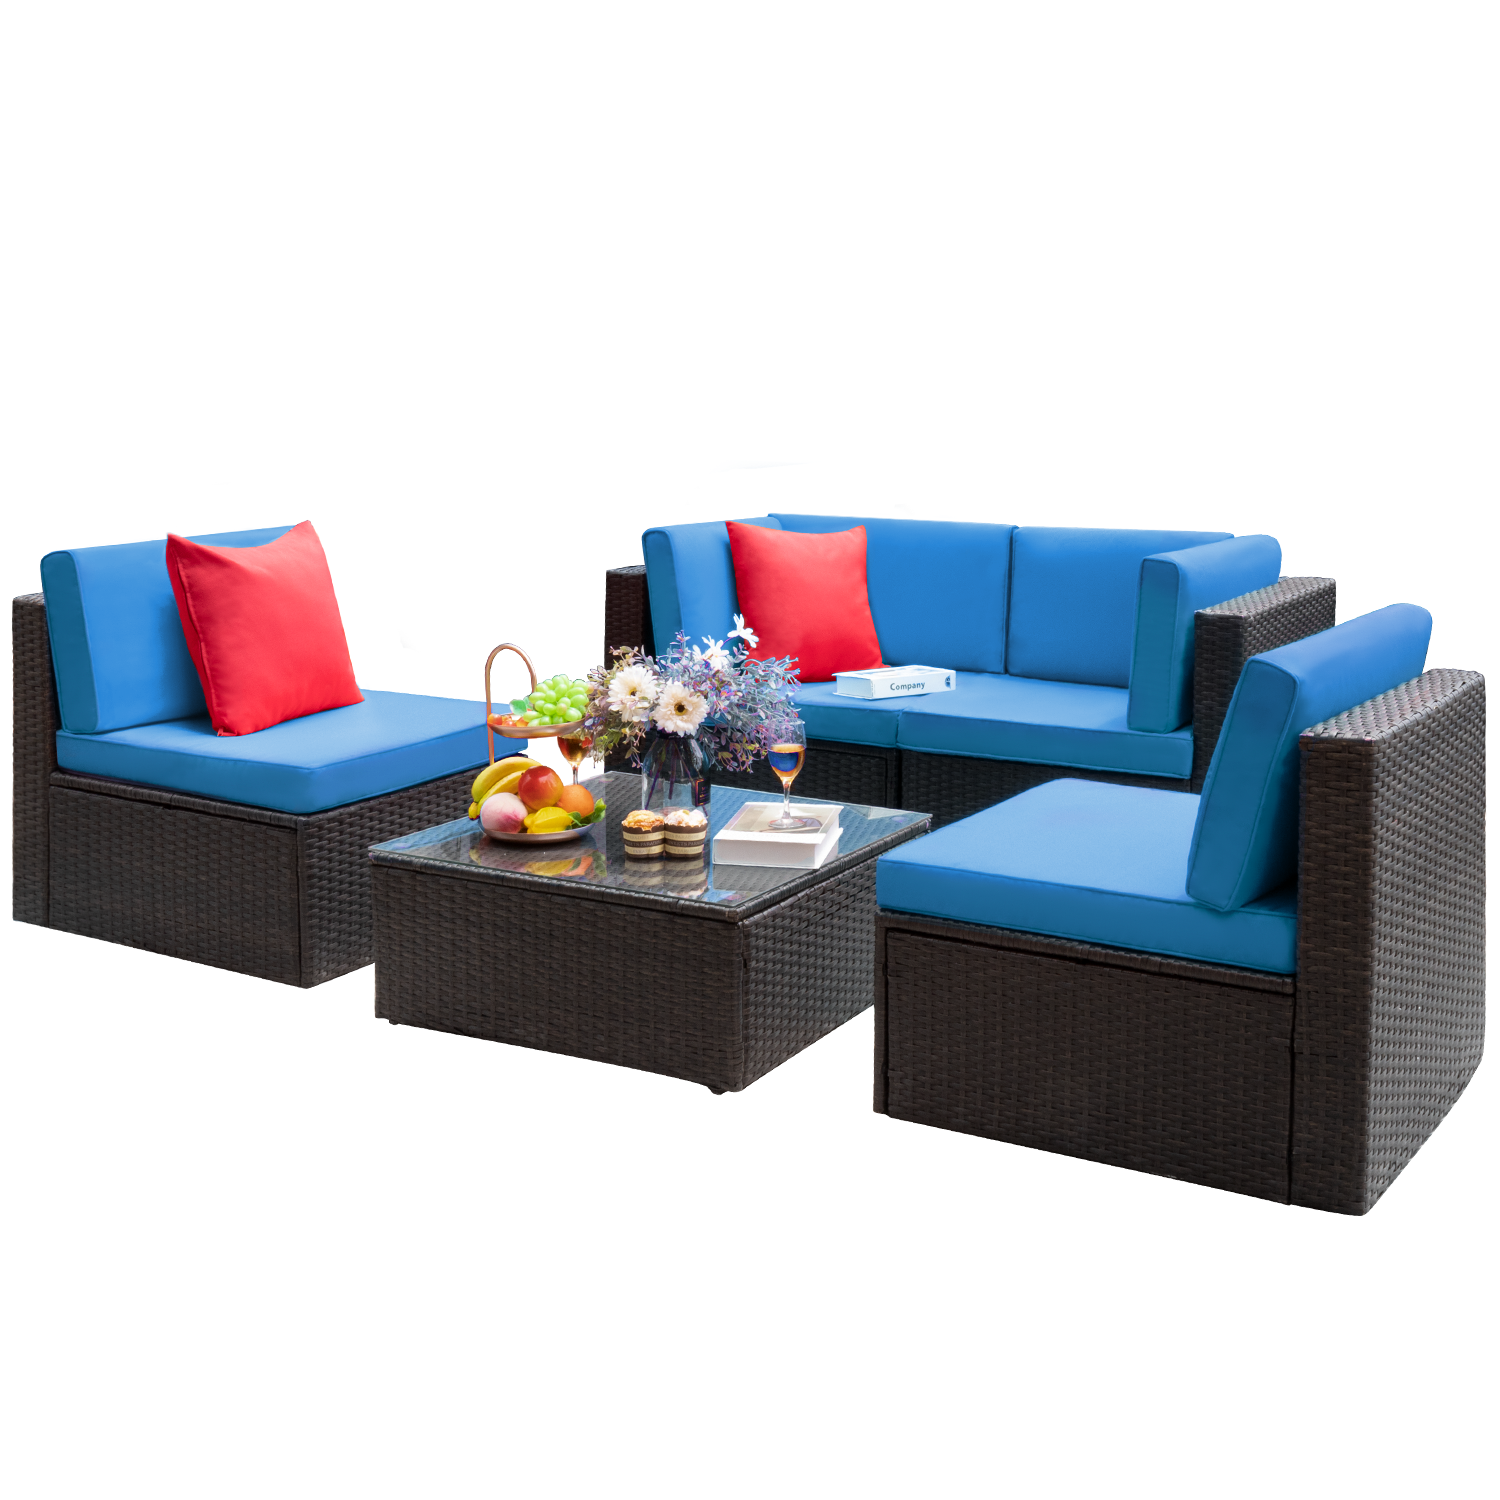 Lacoo 5 Pieces Patio Sectional Sofa Set All-Weather Wicker Rattan Conversation Sets with Glass Table, Blue - image 1 of 7